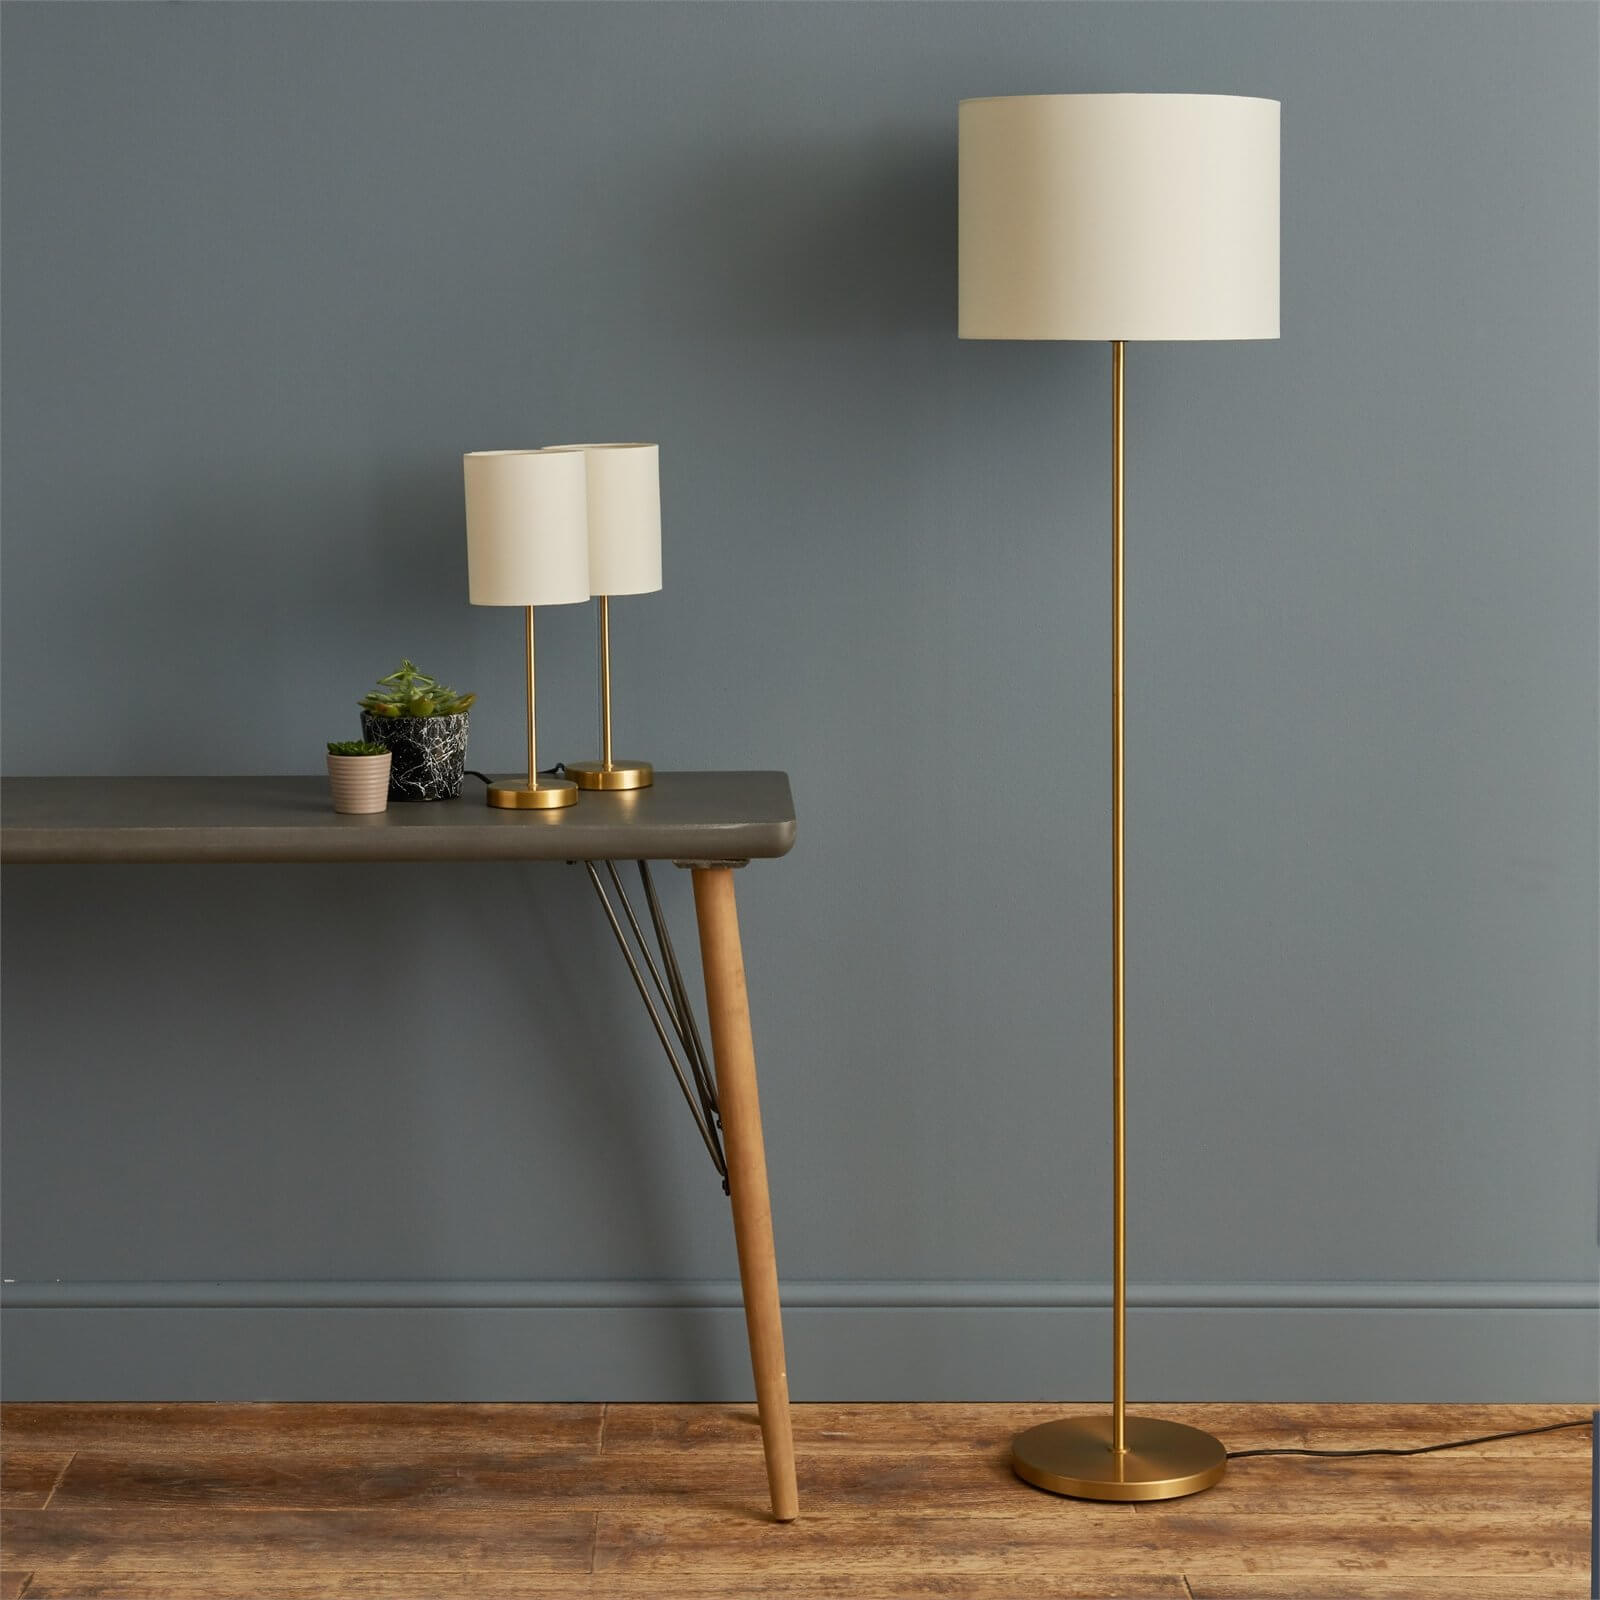 Floor Lamp & Matching Table Lamps Set - Gold and Cream